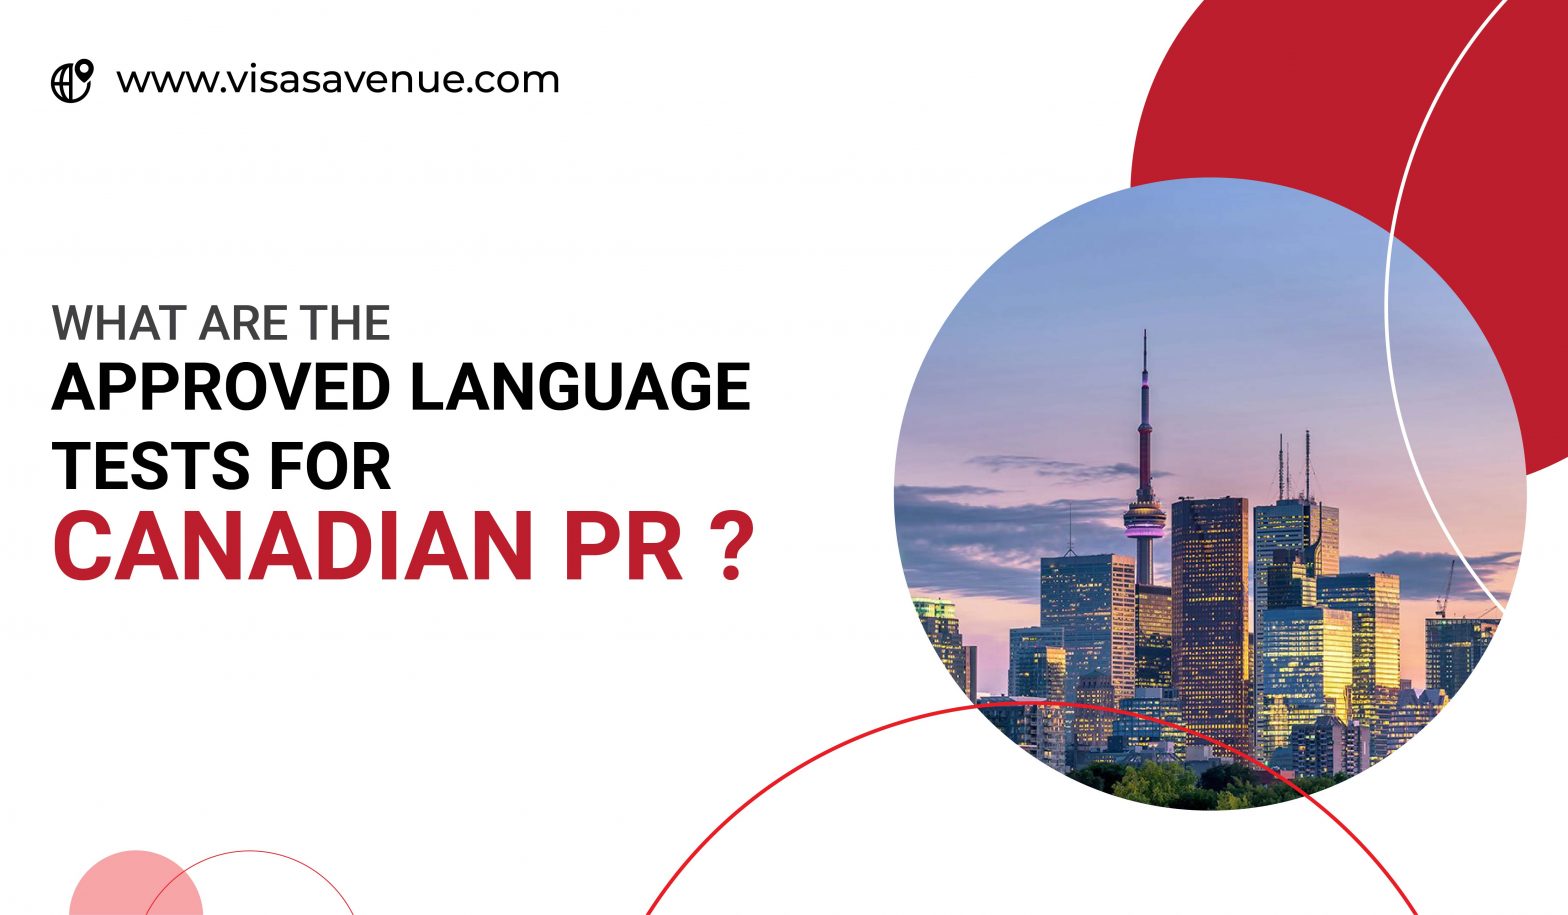 What are the Approved Language Tests for Canadian PR